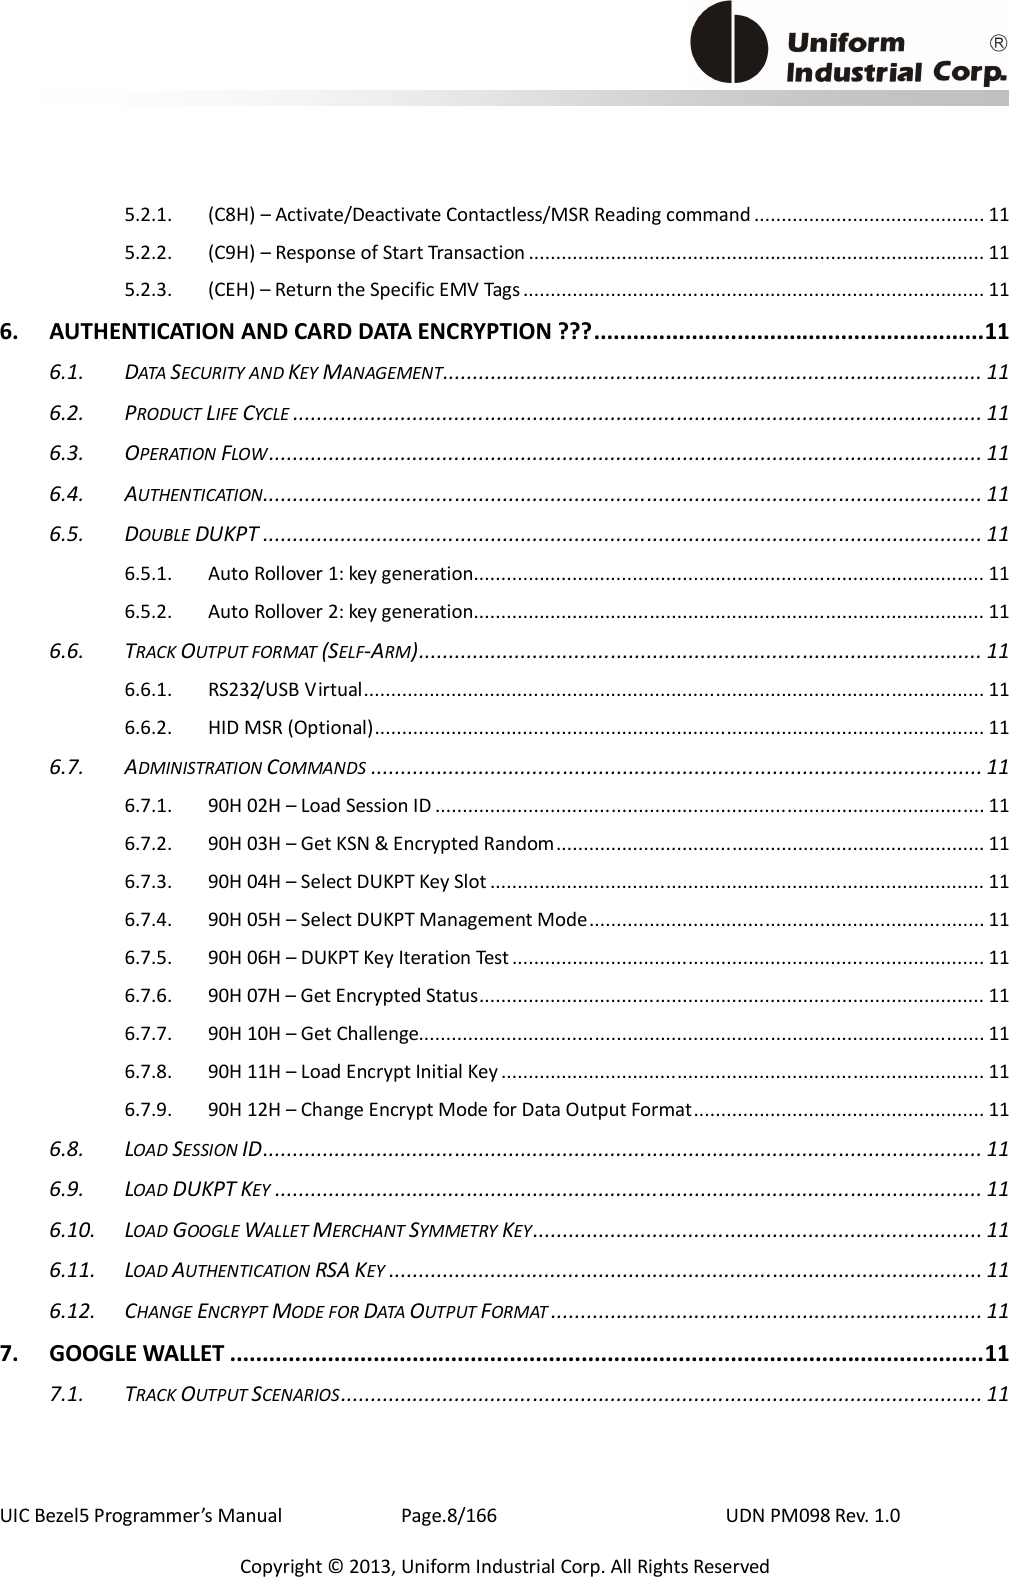                                            UIC Bezel5 Programmer’s Manual      Page.8/166                    UDN PM098 Rev. 1.0 Copyright © 2013, Uniform Industrial Corp. All Rights Reserved 5.2.1. (C8H) – Activate/Deactivate Contactless/MSR Reading command .......................................... 11 5.2.2. (C9H) – Response of Start Transaction ................................................................................... 11 5.2.3. (CEH) – Return the Specific EMV Tags.................................................................................... 11 6. AUTHENTICATION AND CARD DATA ENCRYPTION ???............................................................11 6.1. DATA SECURITY AND KEY MANAGEMENT.......................................................................................... 11 6.2. PRODUCT LIFE CYCLE ................................................................................................................... 11 6.3. OPERATION FLOW....................................................................................................................... 11 6.4. AUTHENTICATION........................................................................................................................ 11 6.5. DOUBLE DUKPT ........................................................................................................................ 11 6.5.1. Auto Rollover 1: key generation............................................................................................. 11 6.5.2. Auto Rollover 2: key generation............................................................................................. 11 6.6. TRACK OUTPUT FORMAT (SELF-ARM).............................................................................................. 11 6.6.1. RS232/USB Virtual................................................................................................................. 11 6.6.2. HID MSR (Optional)............................................................................................................... 11 6.7. ADMINISTRATION COMMANDS ...................................................................................................... 11 6.7.1. 90H 02H – Load Session ID .................................................................................................... 11 6.7.2. 90H 03H – Get KSN &amp; Encrypted Random.............................................................................. 11 6.7.3. 90H 04H – Select DUKPT Key Slot .......................................................................................... 11 6.7.4. 90H 05H – Select DUKPT Management Mode........................................................................ 11 6.7.5. 90H 06H – DUKPT Key Iteration Test ...................................................................................... 11 6.7.6. 90H 07H – Get Encrypted Status............................................................................................ 11 6.7.7. 90H 10H – Get Challenge....................................................................................................... 11 6.7.8. 90H 11H – Load Encrypt Initial Key........................................................................................ 11 6.7.9. 90H 12H – Change Encrypt Mode for Data Output Format..................................................... 11 6.8. LOAD SESSION ID........................................................................................................................ 11 6.9. LOAD DUKPT KEY ...................................................................................................................... 11 6.10. LOAD GOOGLE WALLET MERCHANT SYMMETRY KEY........................................................................... 11 6.11. LOAD AUTHENTICATION RSA KEY ................................................................................................... 11 6.12. CHANGE ENCRYPT MODE FOR DATA OUTPUT FORMAT ........................................................................ 11 7. GOOGLE WALLET ....................................................................................................................11 7.1. TRACK OUTPUT SCENARIOS........................................................................................................... 11 